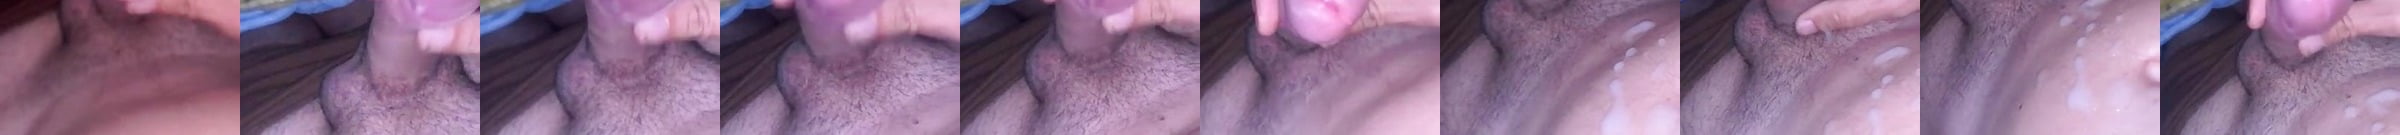 French Daddy Gay Cum Tribute Hd Porn Video 06 Xhamster